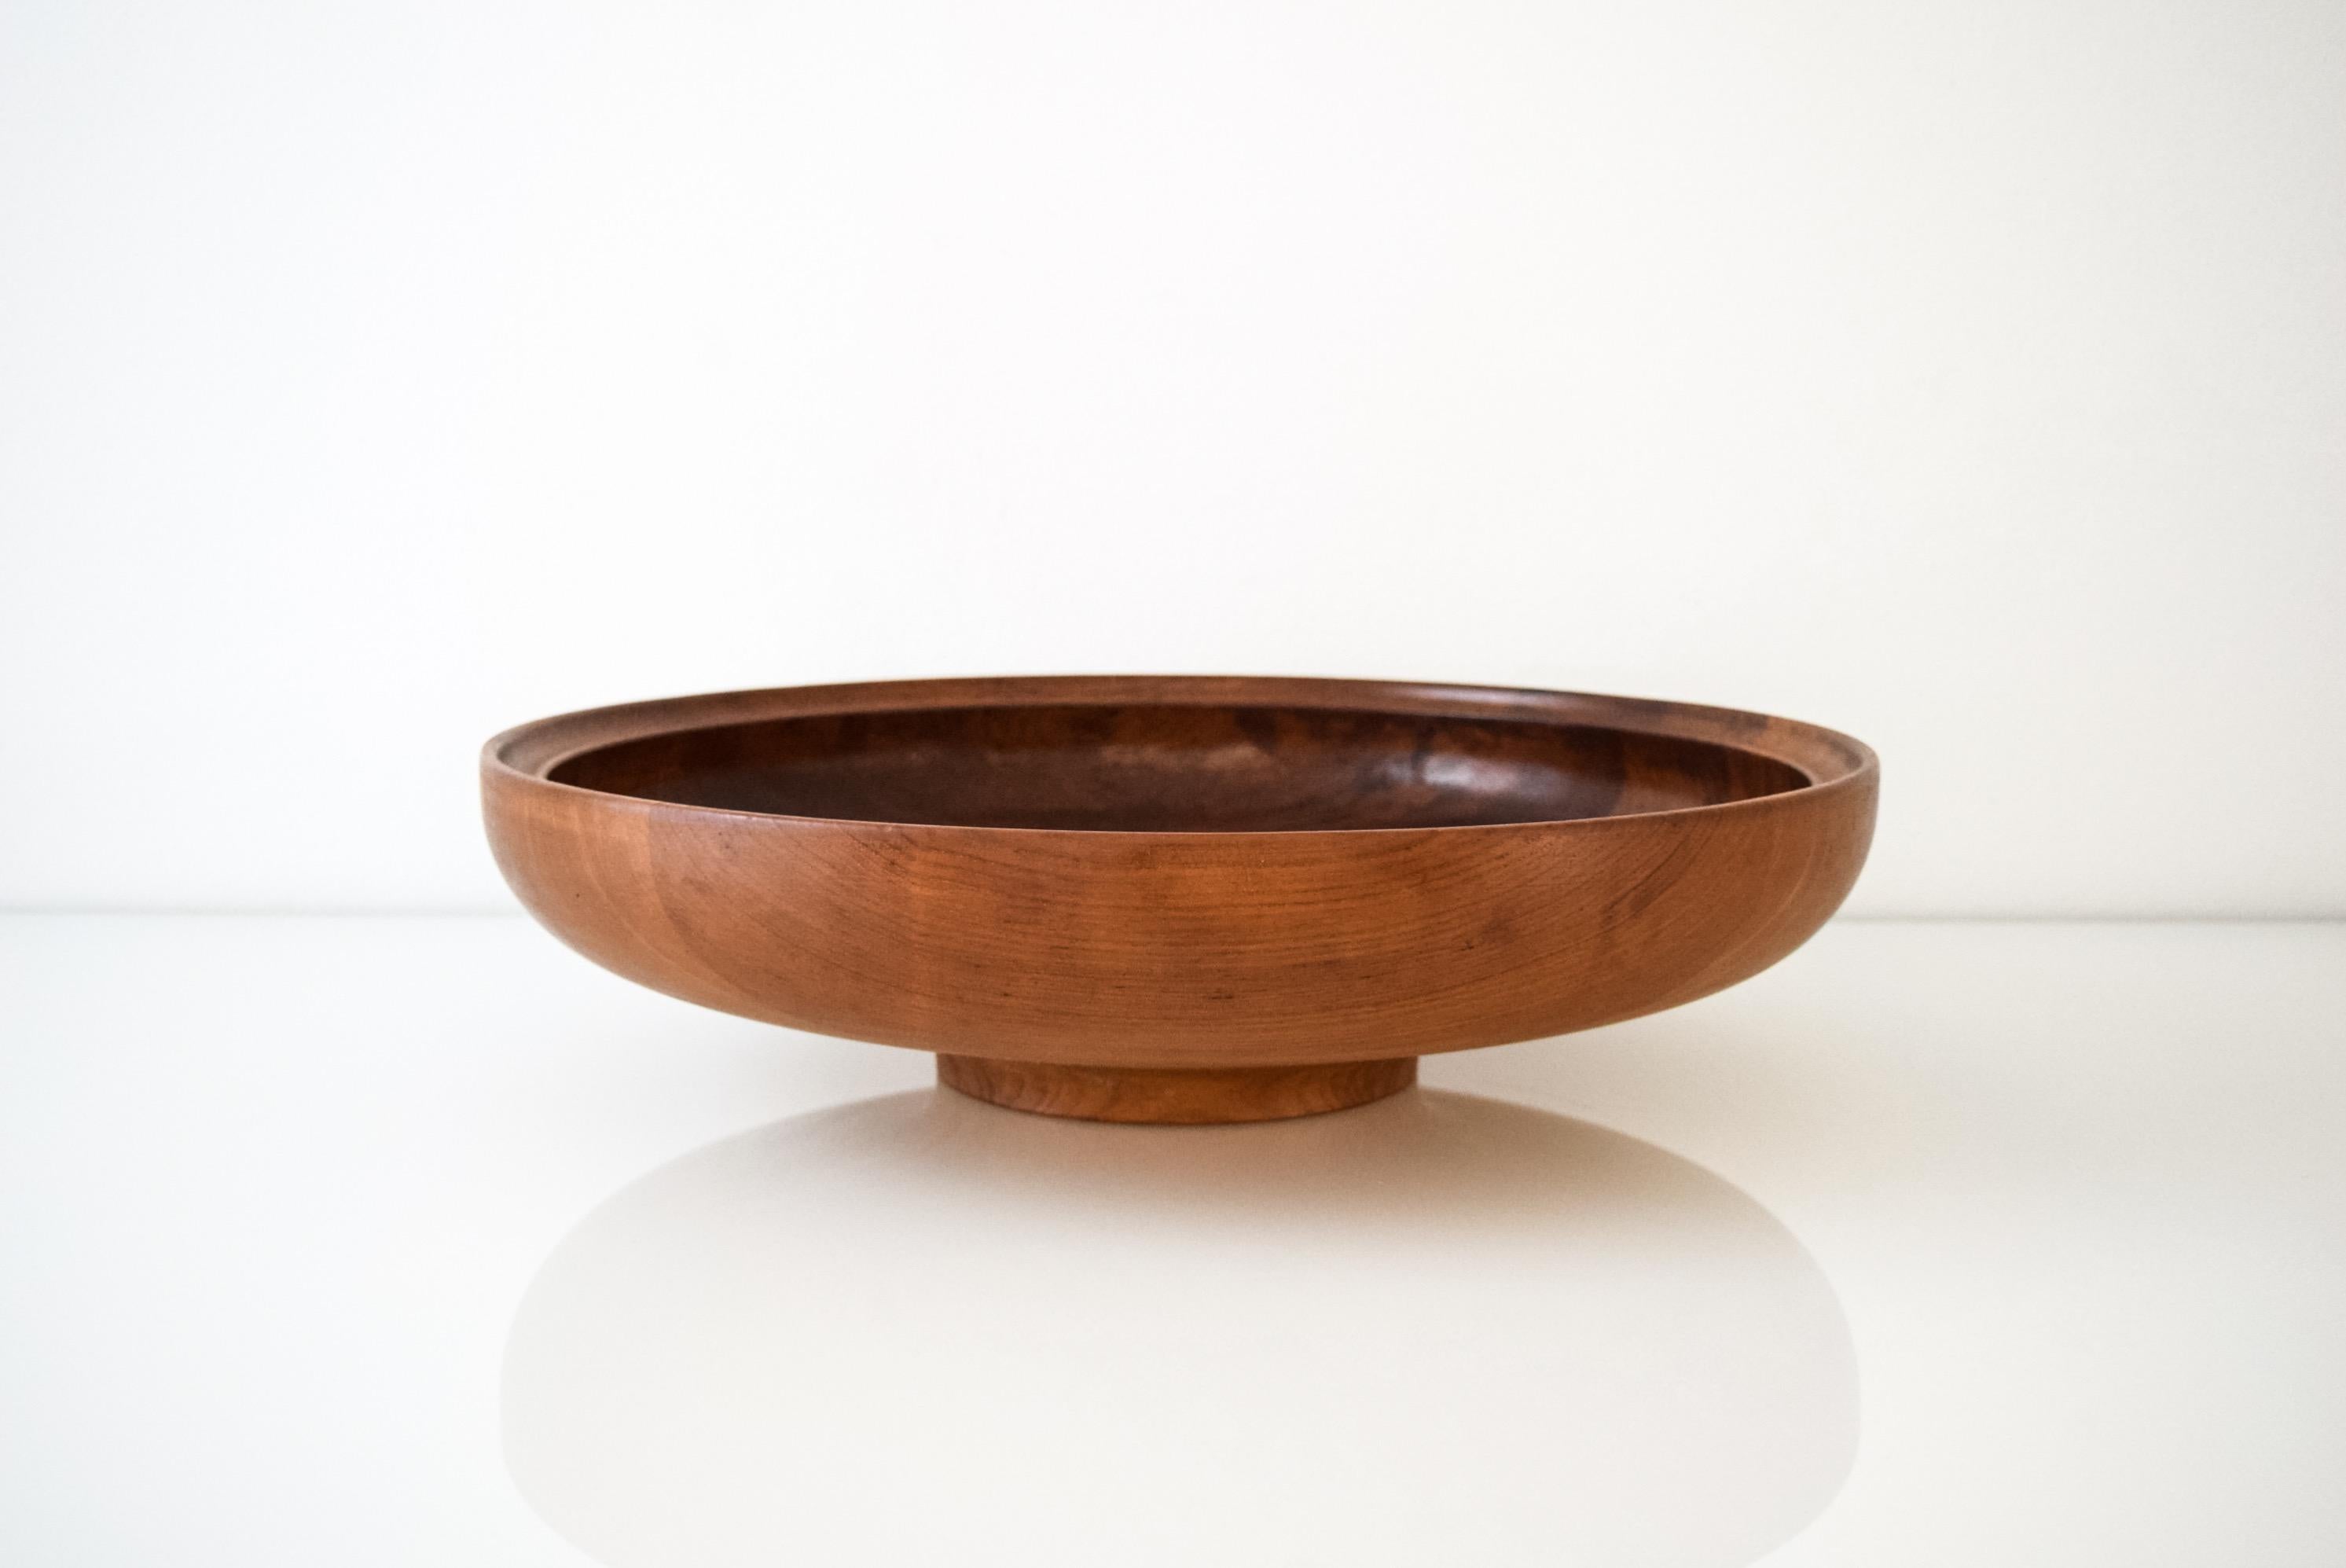 • Rare iconic midcentury Henning Koppel large teak bowl for Georg Jensen circa 1960.
• Made in Denmark.
• Rare large size with a diameter of 18 3/4